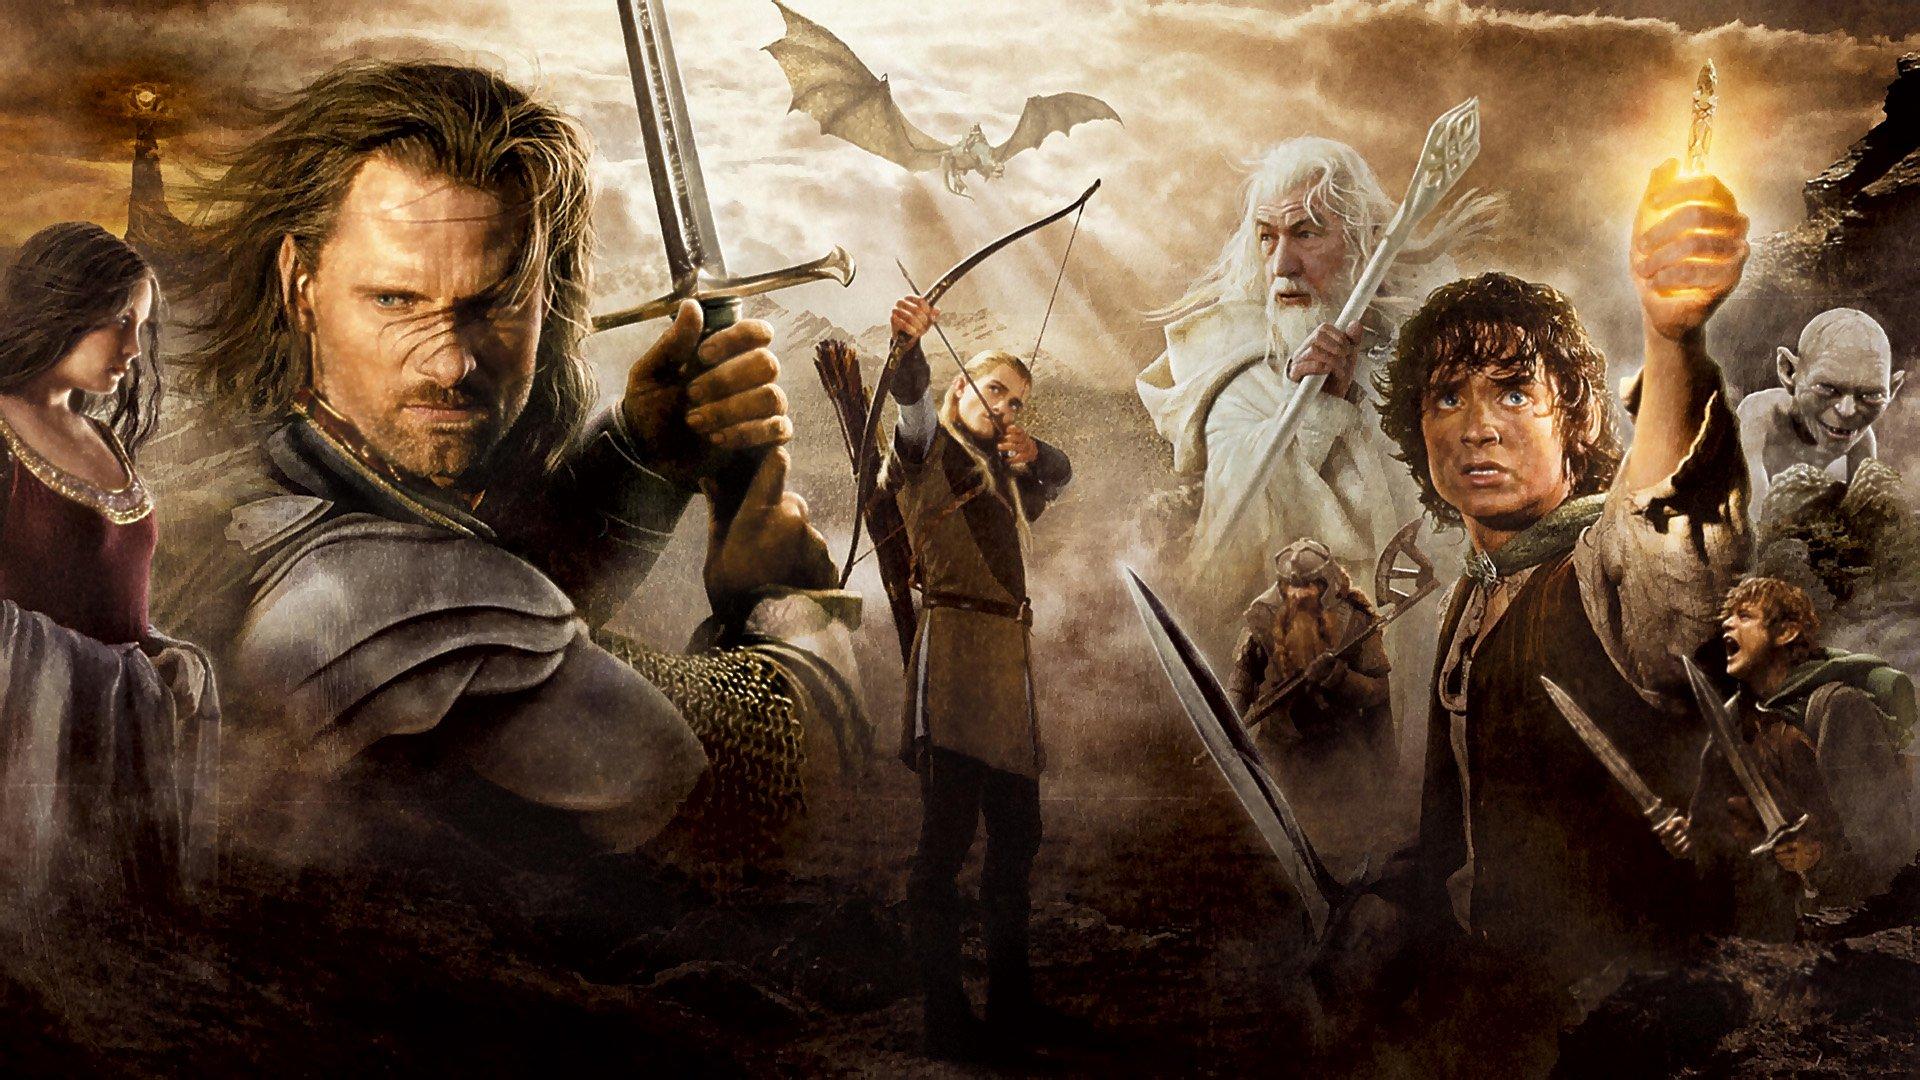 The Lord Of The Rings: The Return Of The King Hintergrundbild 1920x1080. The Return of The King Wallpaper Free The Return of The King Background